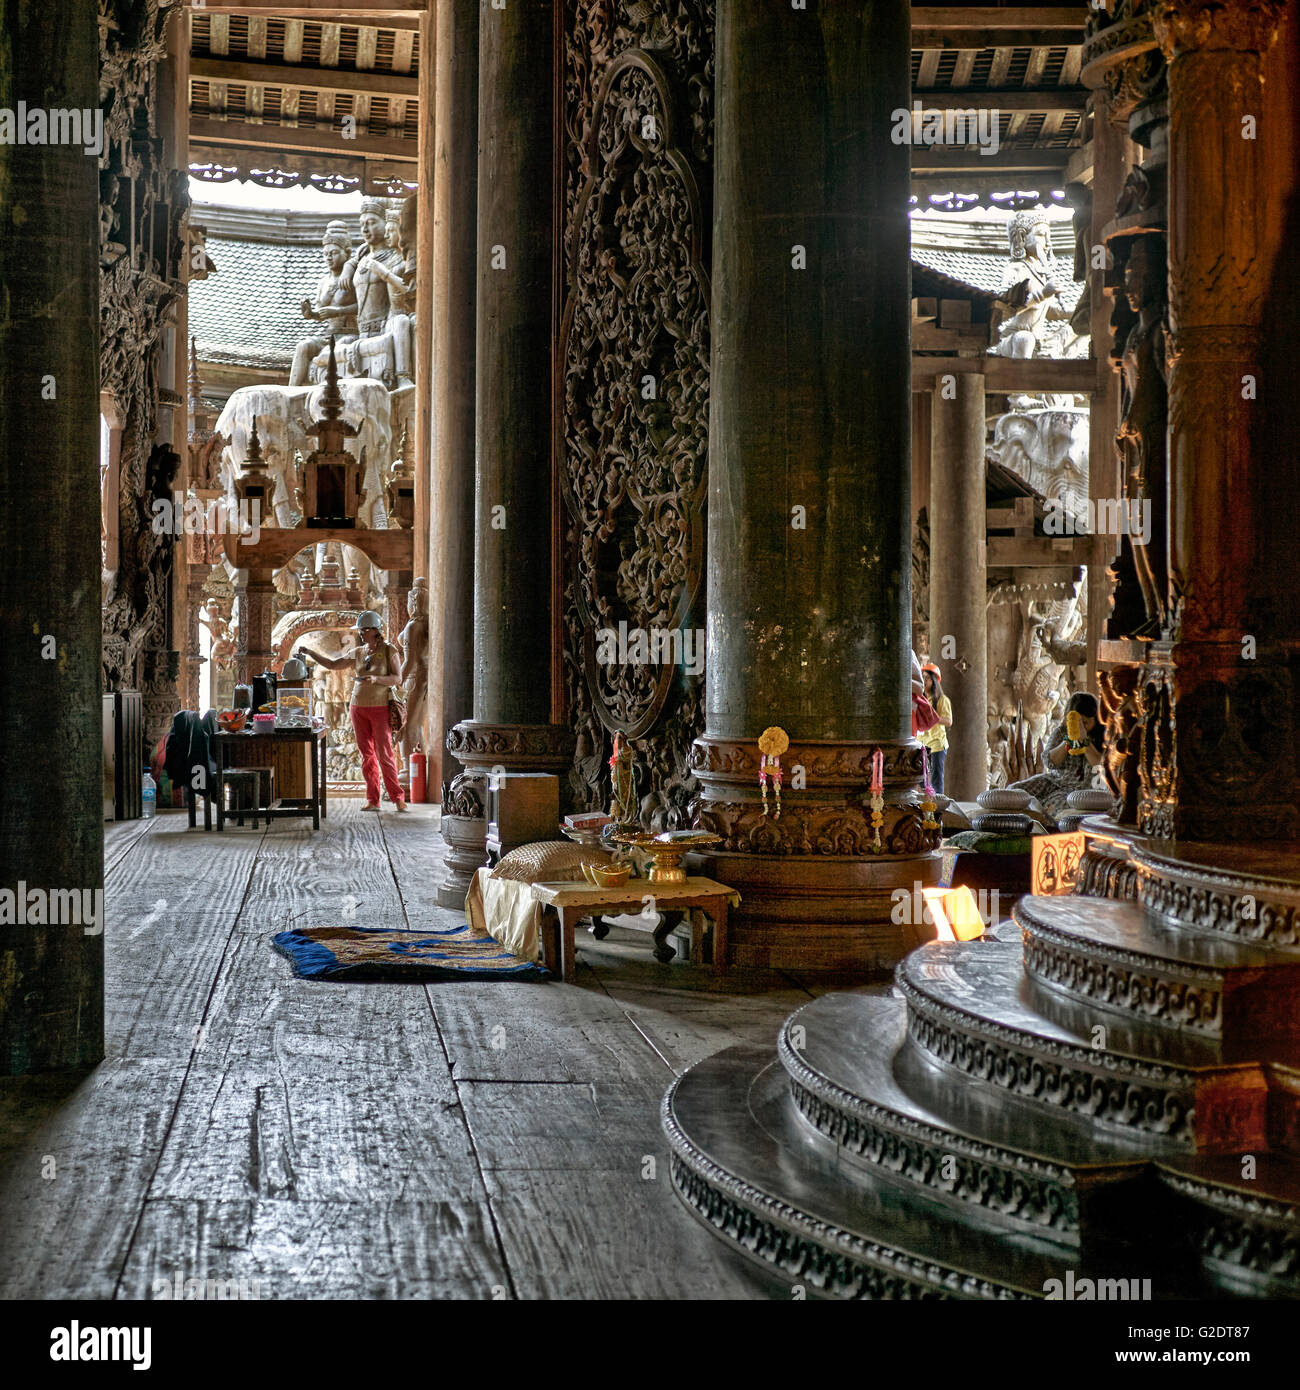 interior view of the Sanctuary of truth Buddhist Hindu temple. Pattaya Thailand S. E. Asia Stock Photo